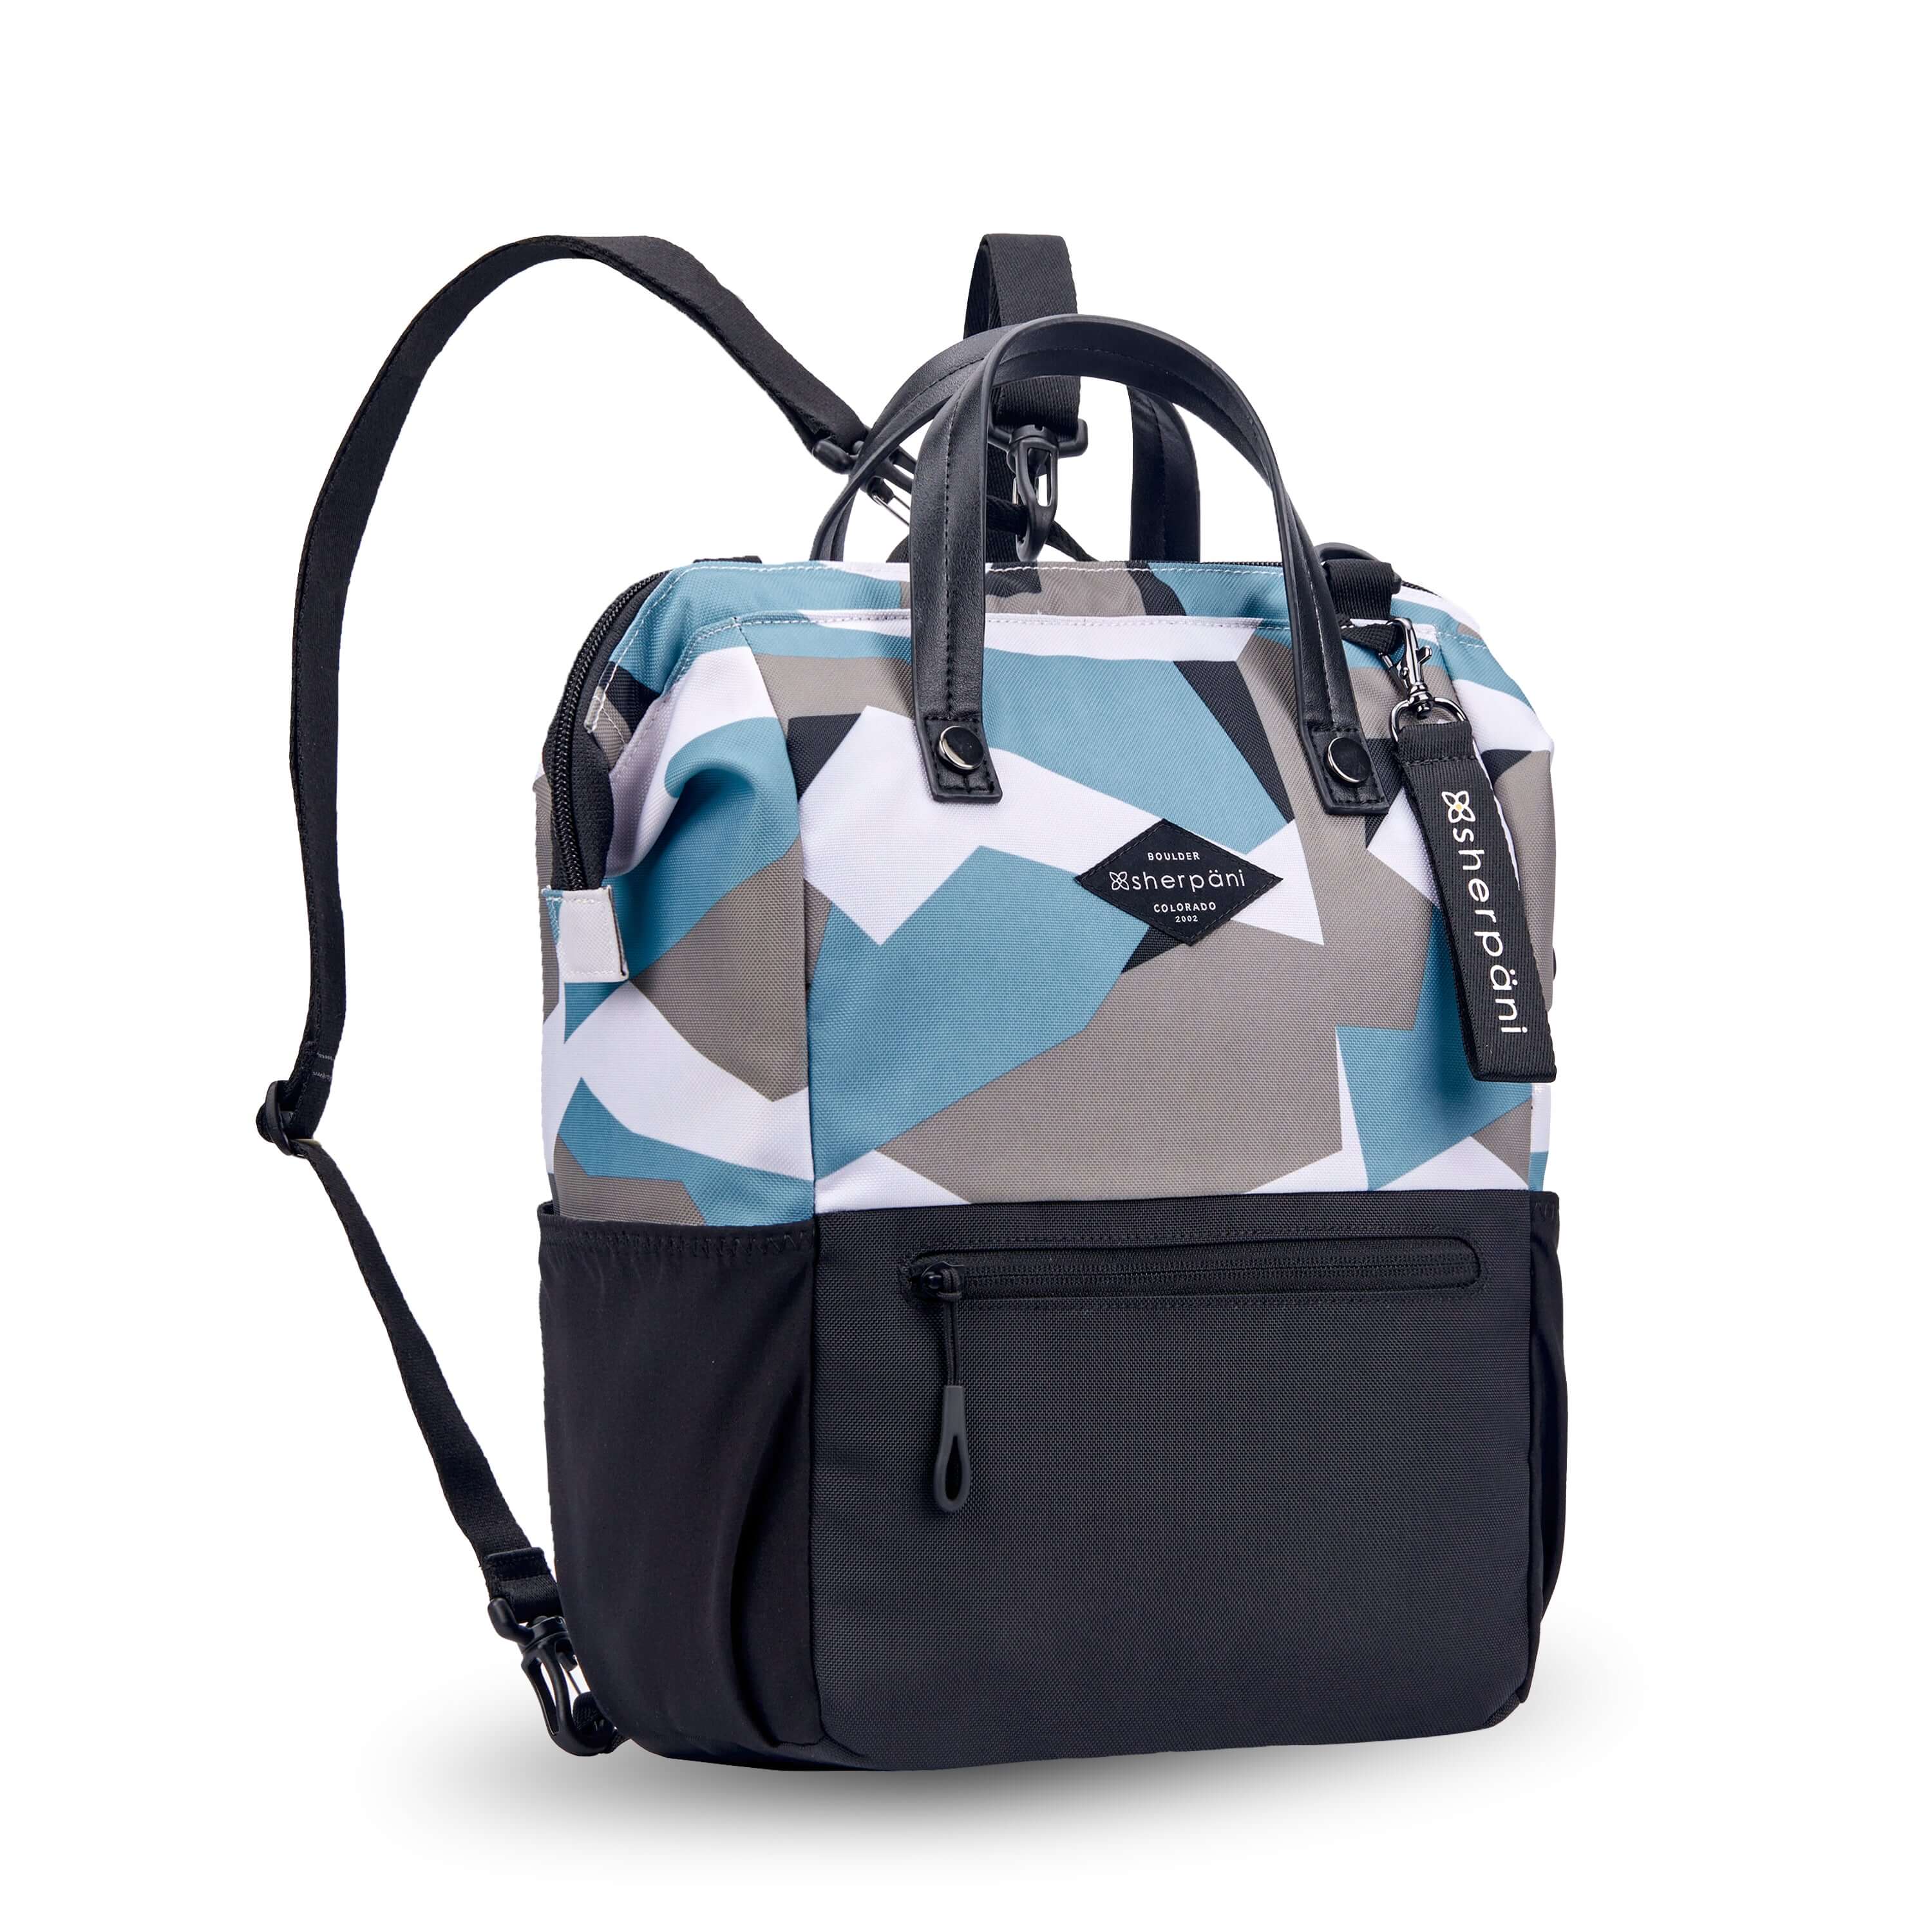 Angled front view of Sherpani three-in-one bag, the Dispatch in Summer Camo. The bag is two-toned: the top is a camouflage pattern of light blue, gray and white, the bottom is black. There is an external zipper pocket on the front panel. Easy-pull zippers are accented in black. A branded Sherpani keychain is clipped to the upper right corner. Water bottle holders sit on either side of the bag. It has short tote handles and adjustable straps that can function for a backpack or crossbody. 